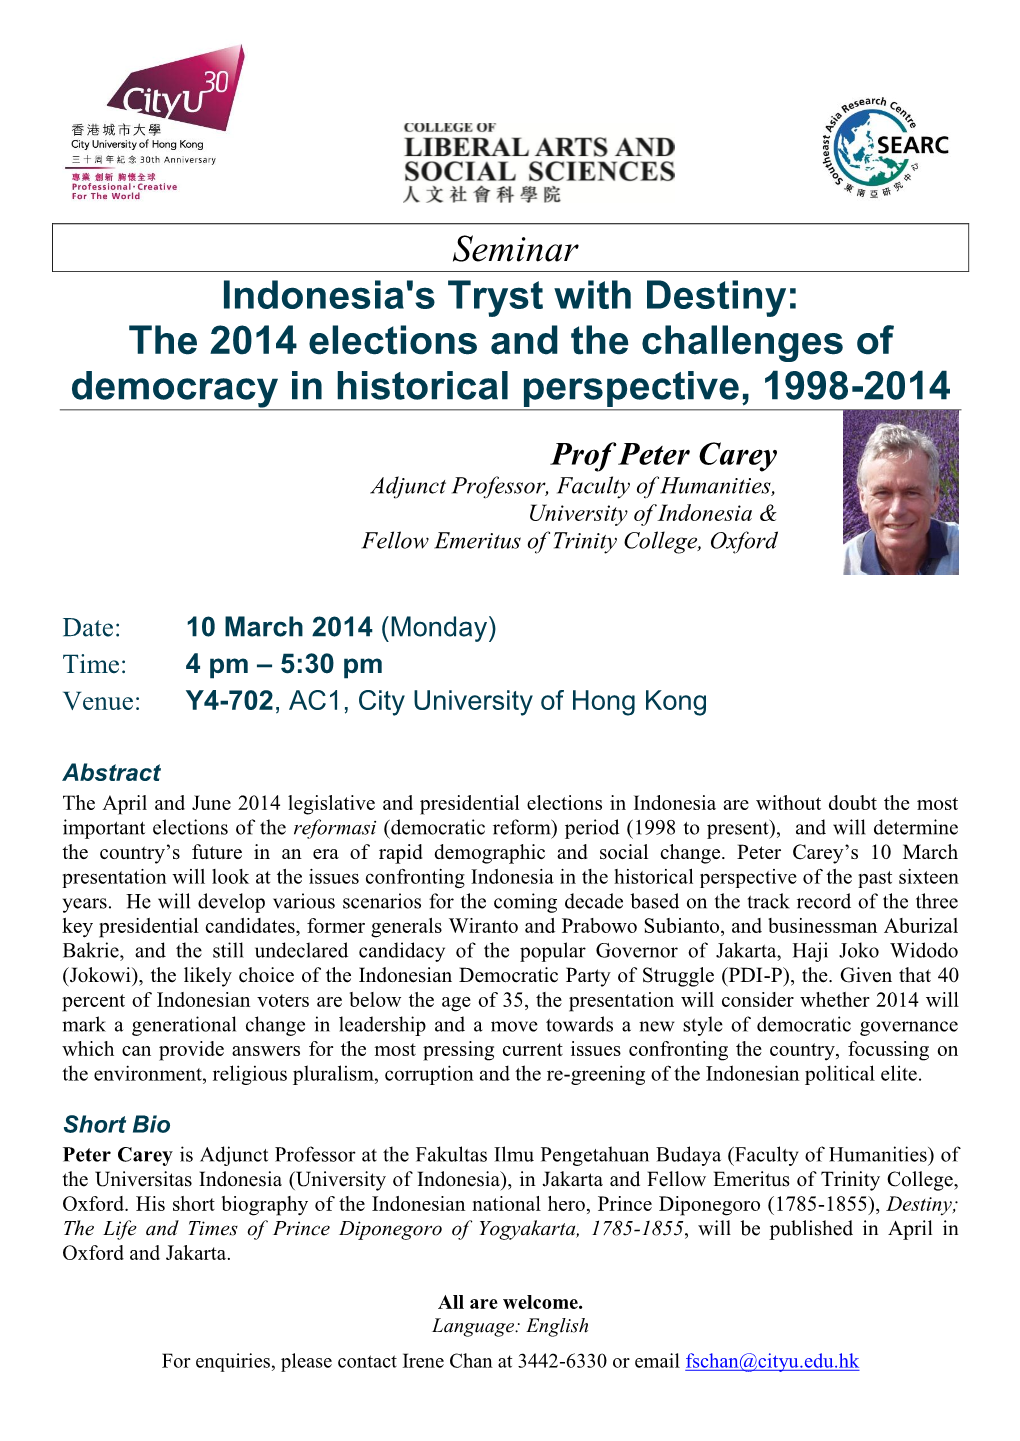 The 2014 Elections and the Challenges of Democracy in Historical Perspective, 1998-2014